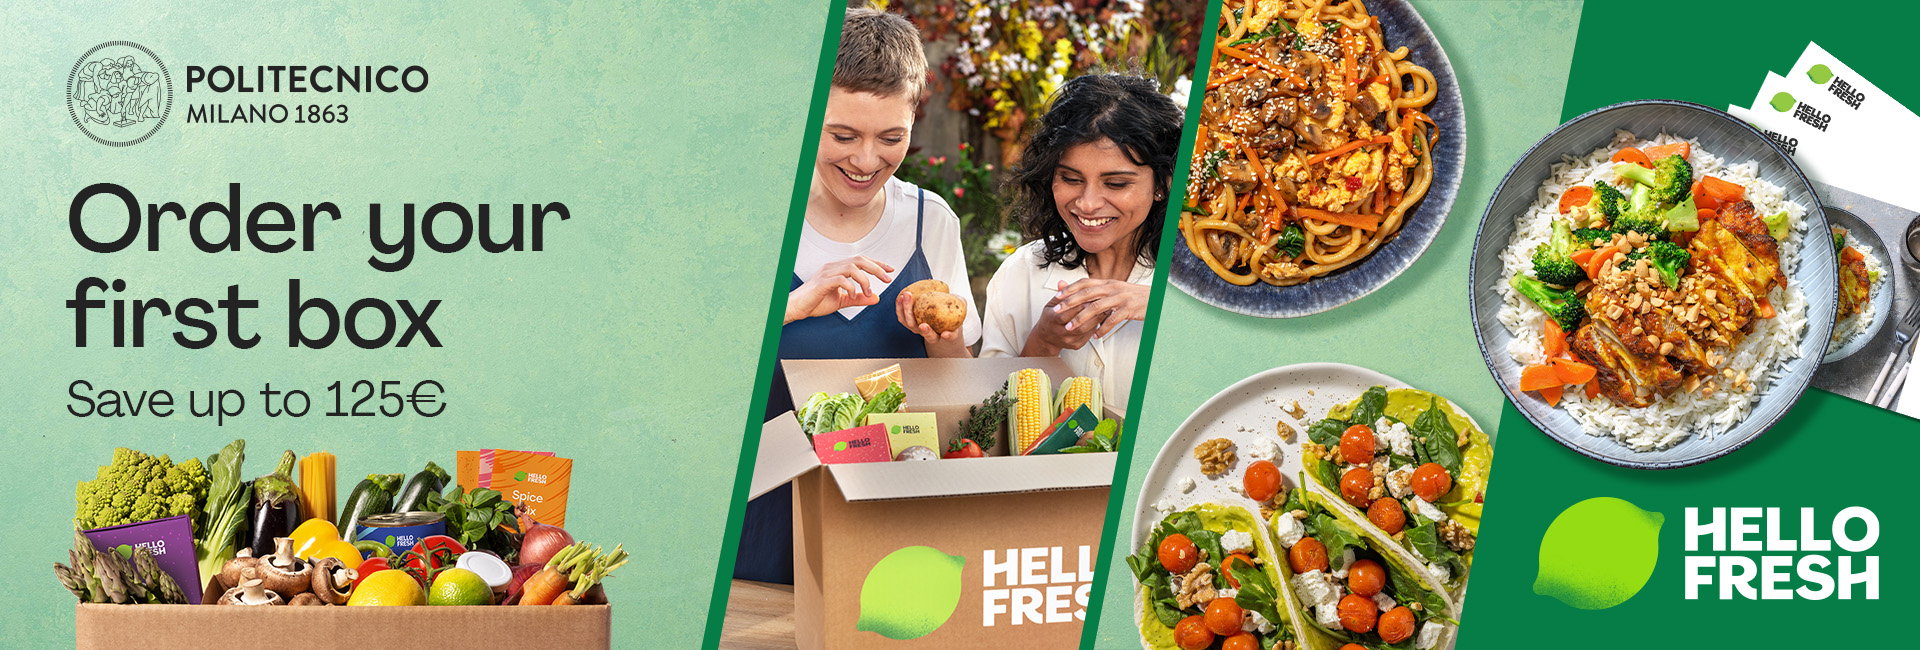 HELLOFRESH: Order your first box, save up to 125 €